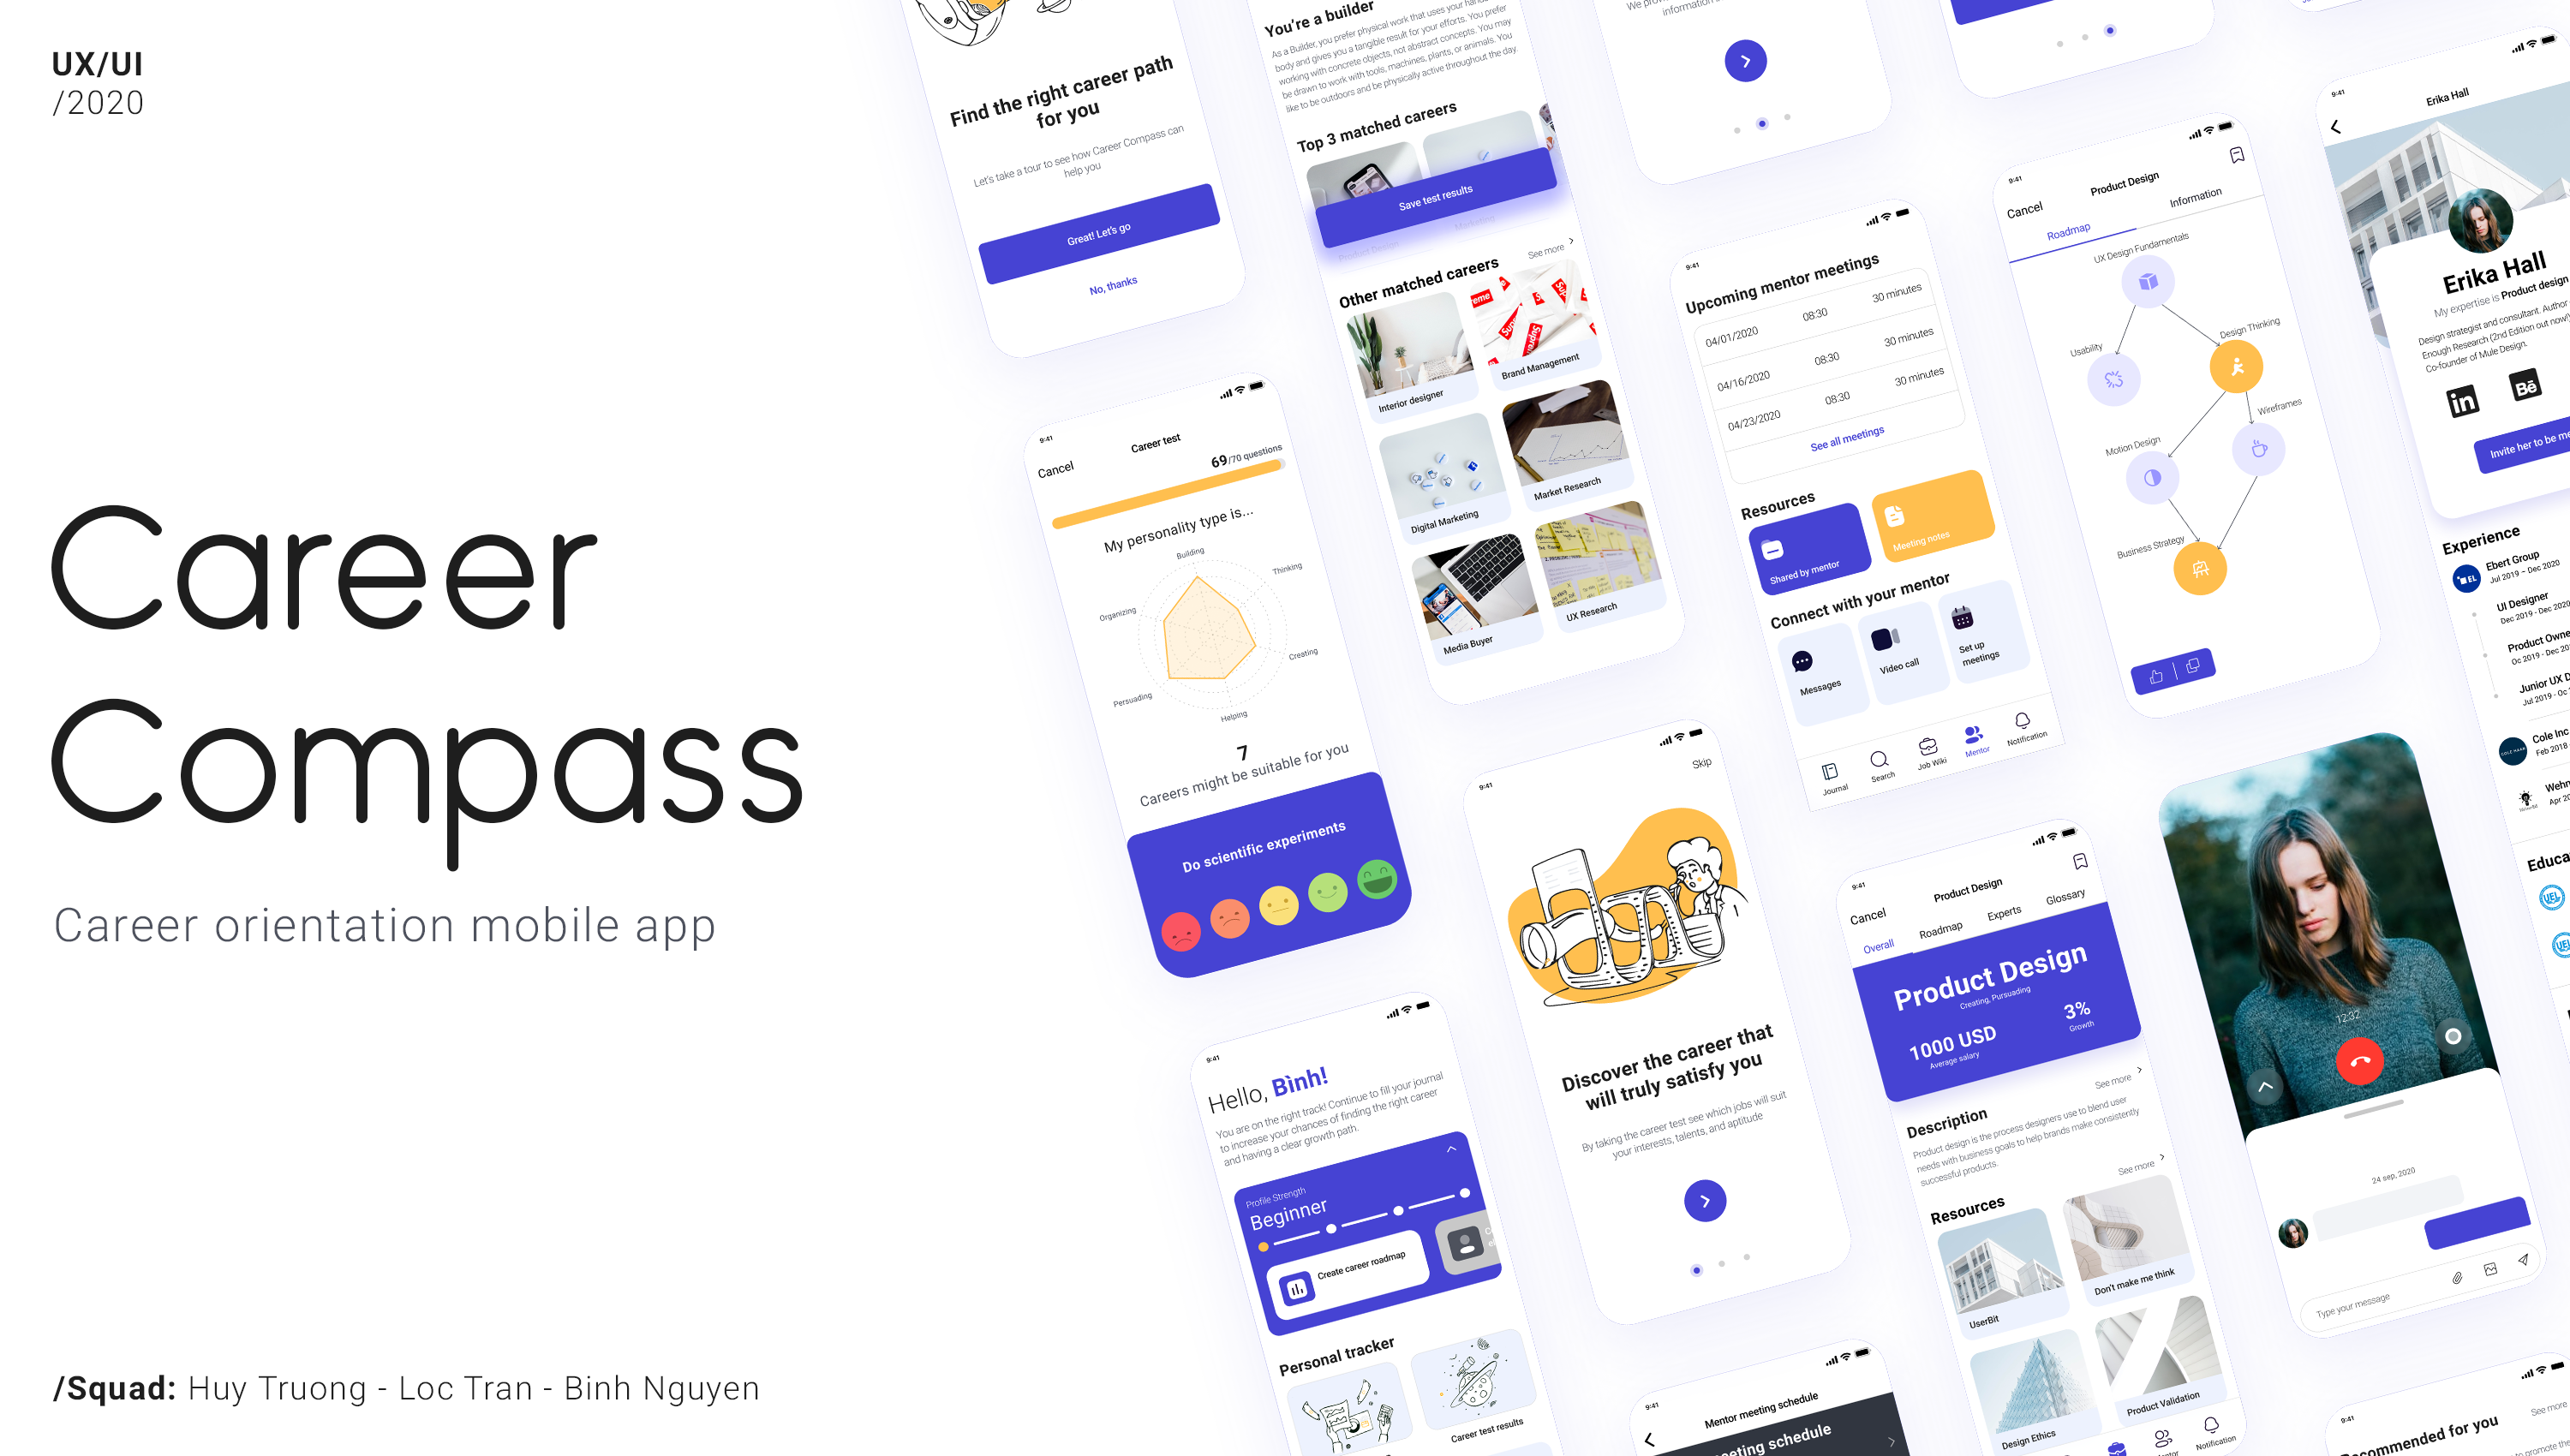 case Career Compass — A career orientation mobile app | by Nguyen | UX Planet